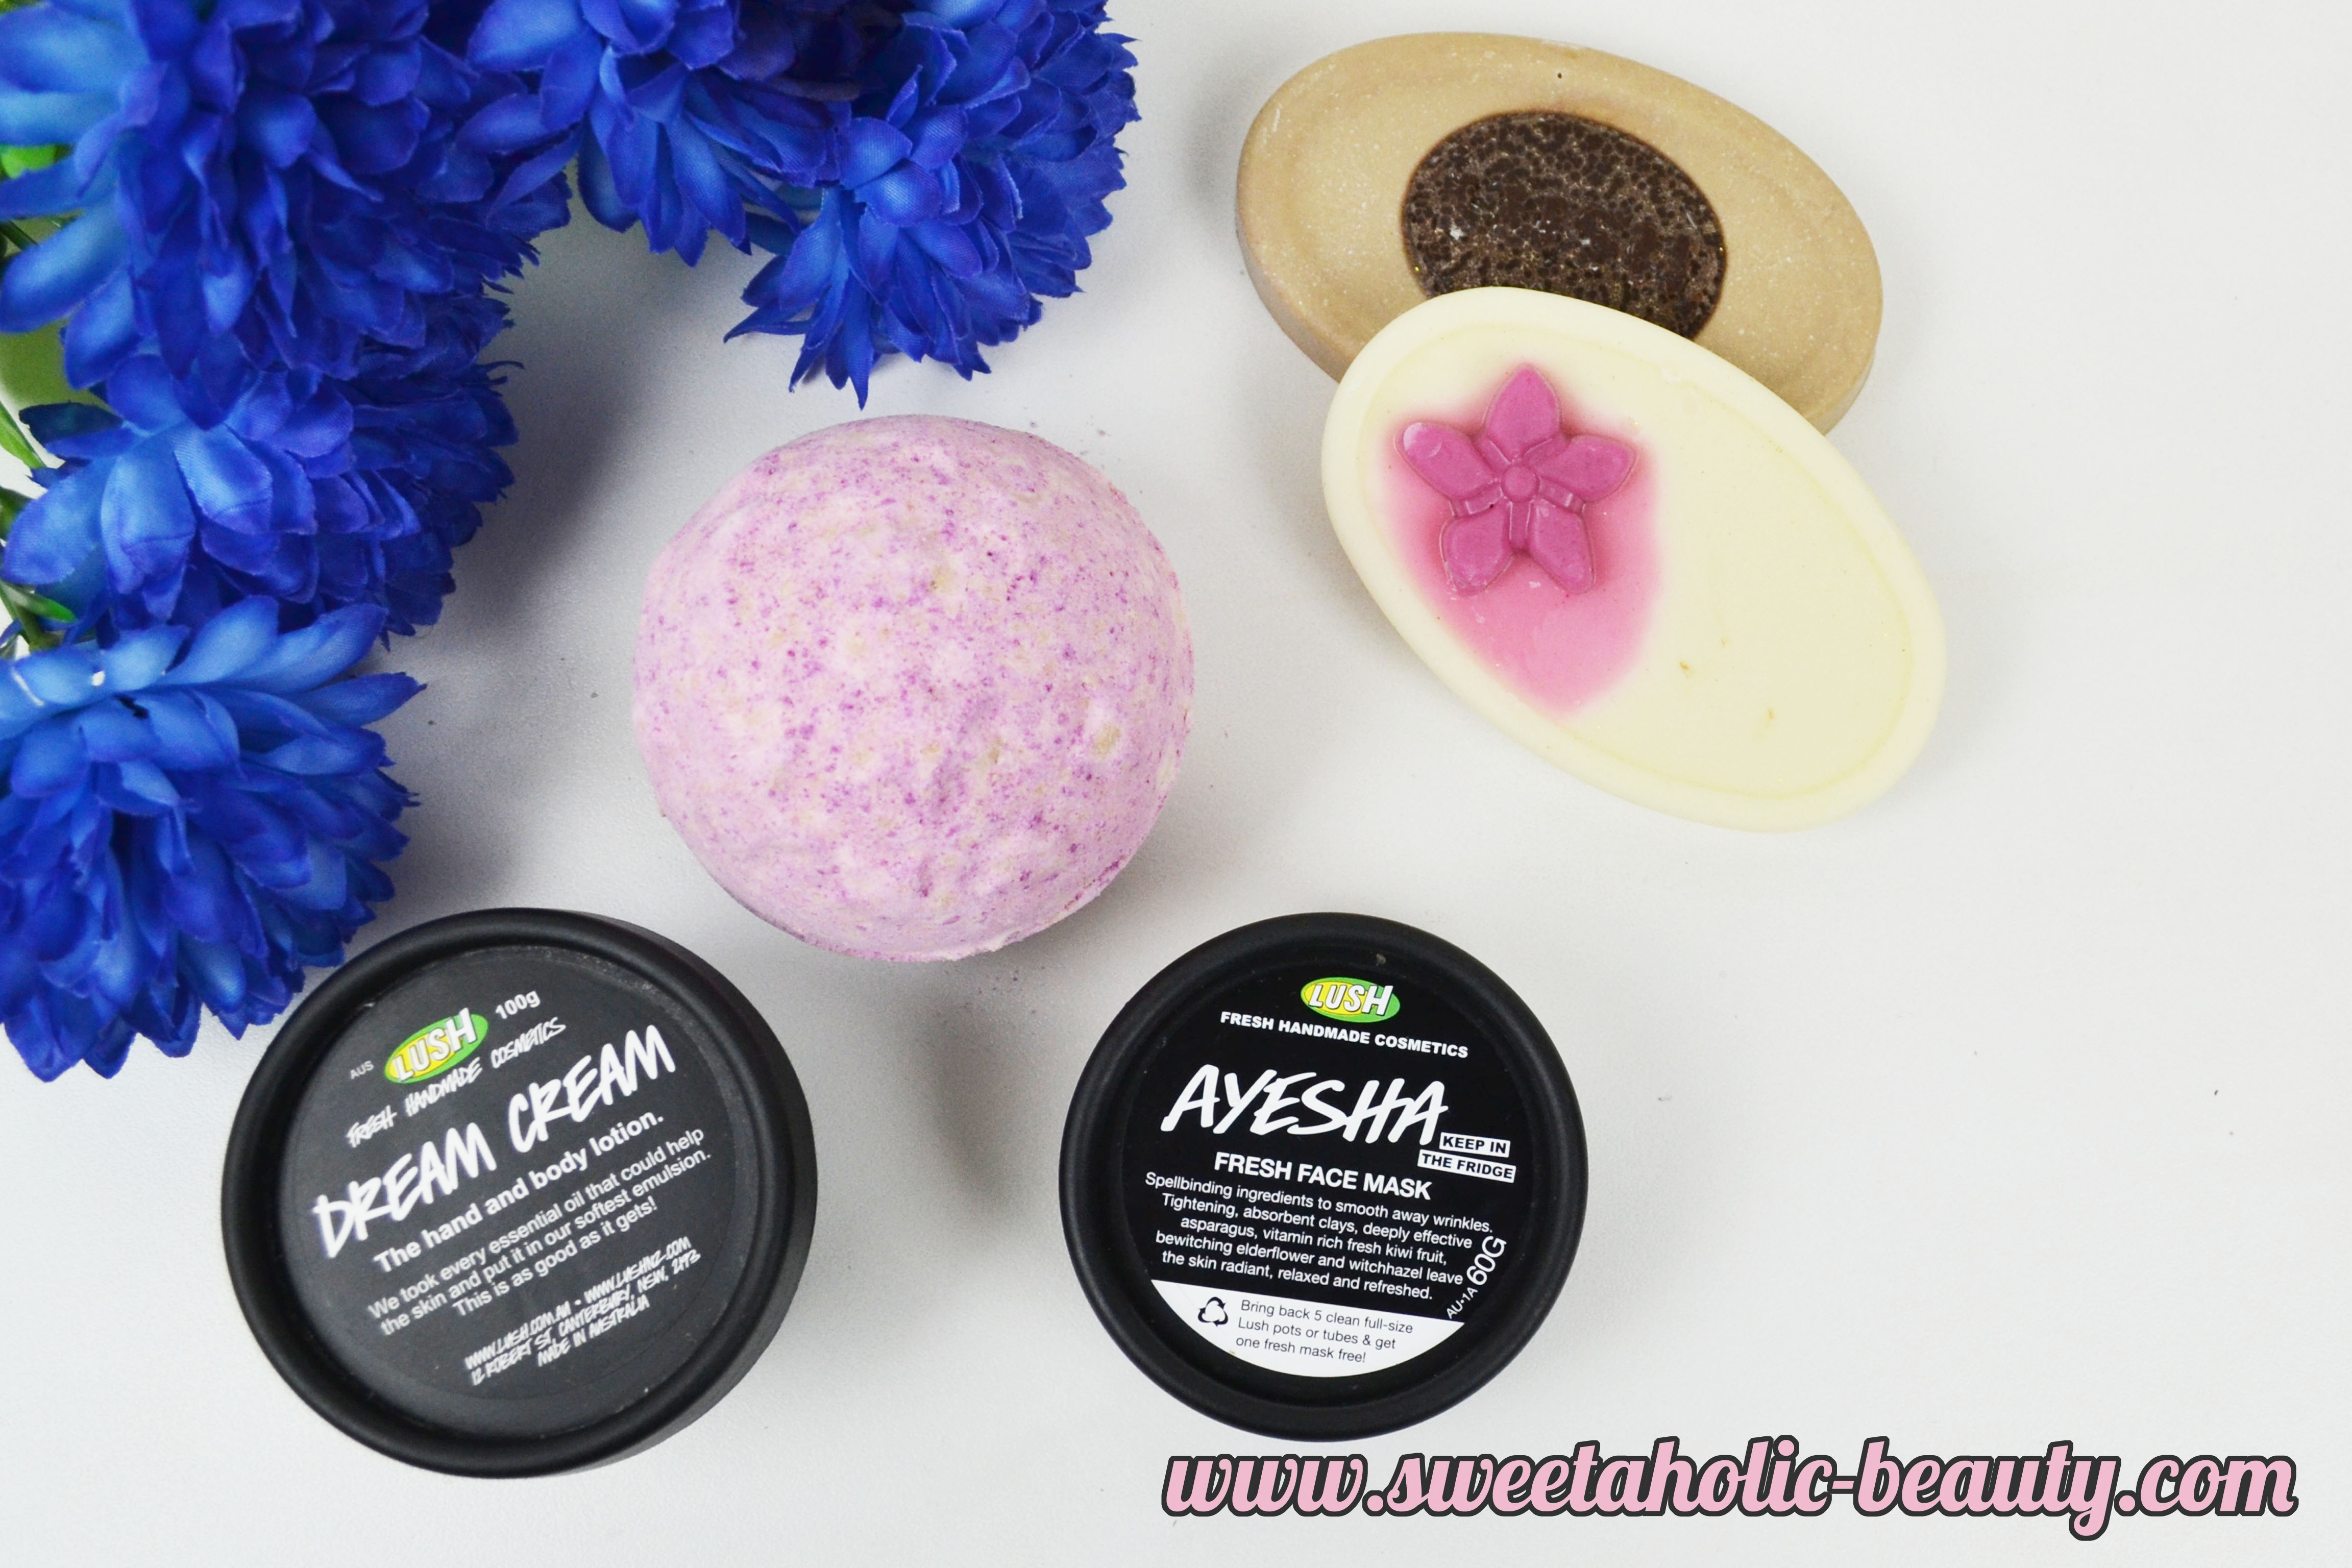 Relax with Lush - Sweetaholic Beauty